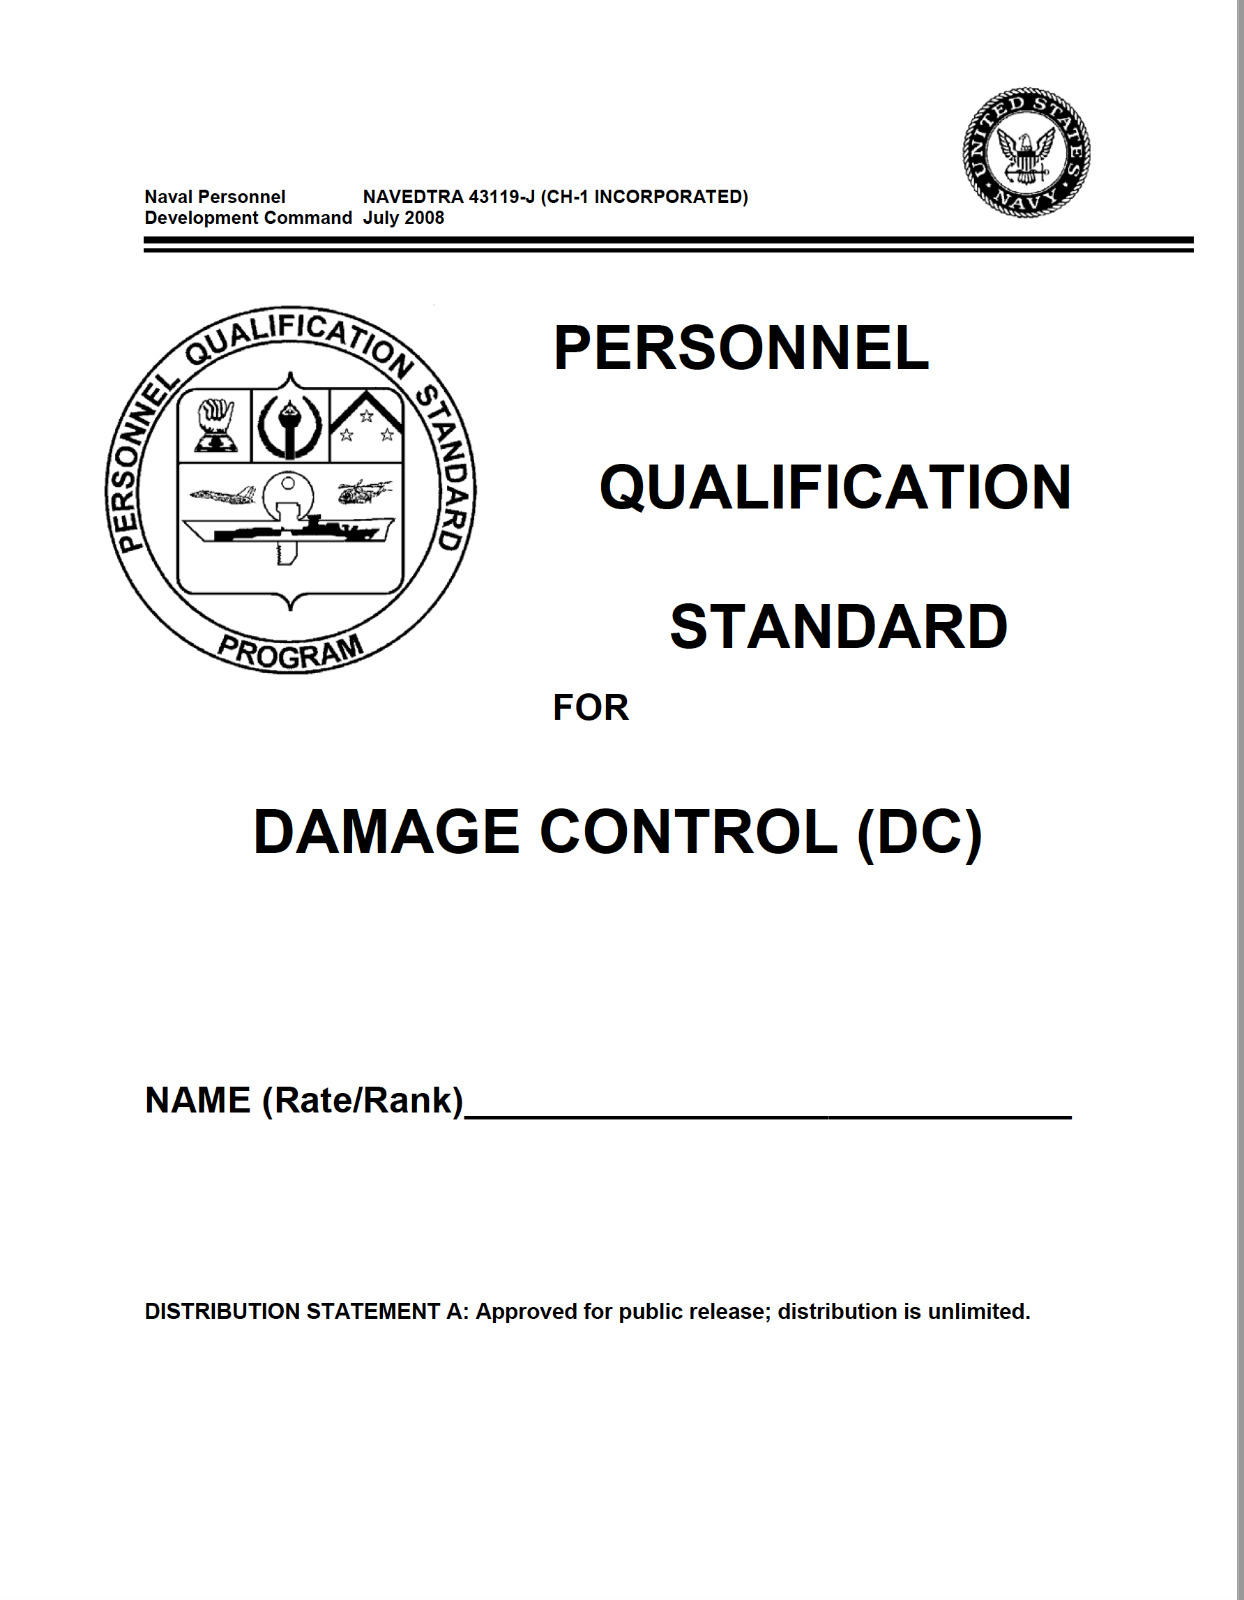 296 Page Navy PERSONNEL QUALIFICATION STANDARD For DAMAGE CONTROL Manual on CD